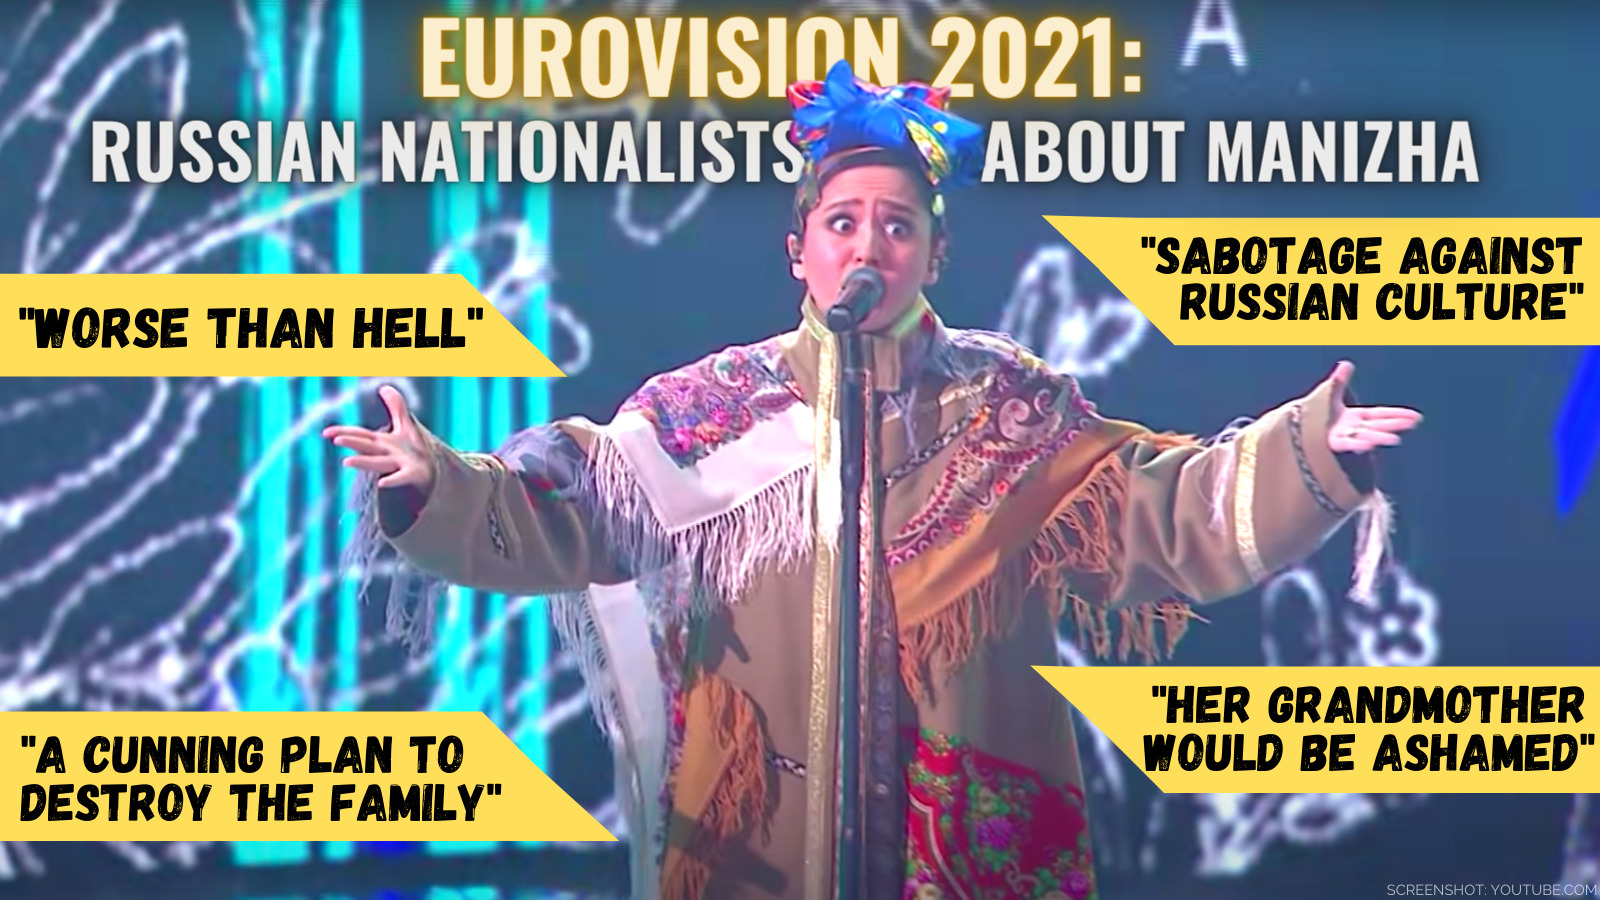 Disinformation about Russian singer Manizha, Eurovision 2021